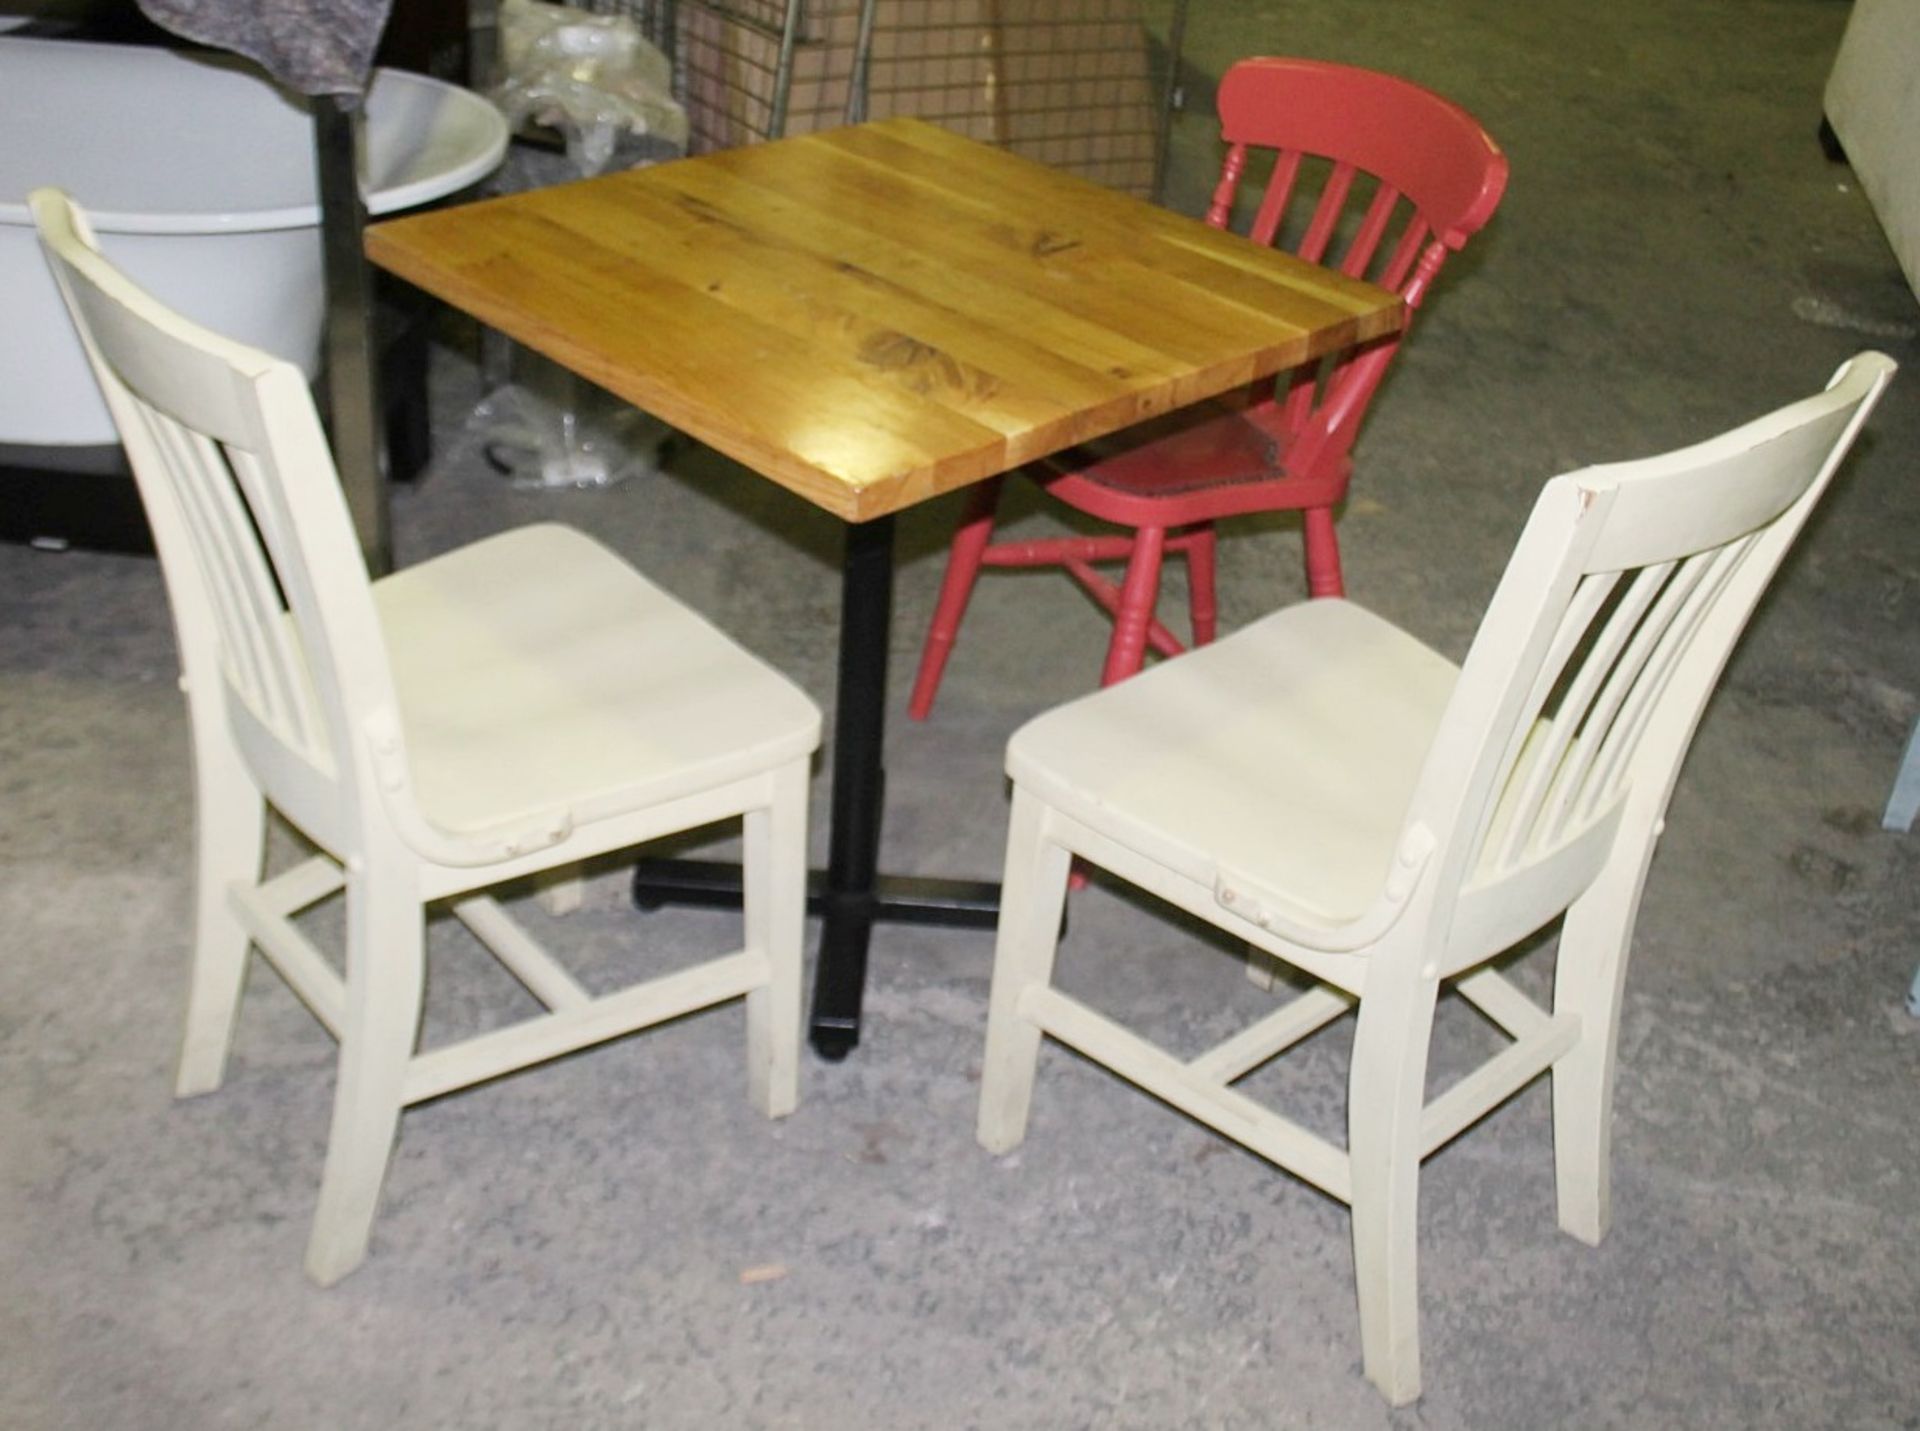 1 x Solid Wood Farmhouse Square Bistro Table With 3 x Chairs Featuring A Solid Oak Table Top - - Image 3 of 3